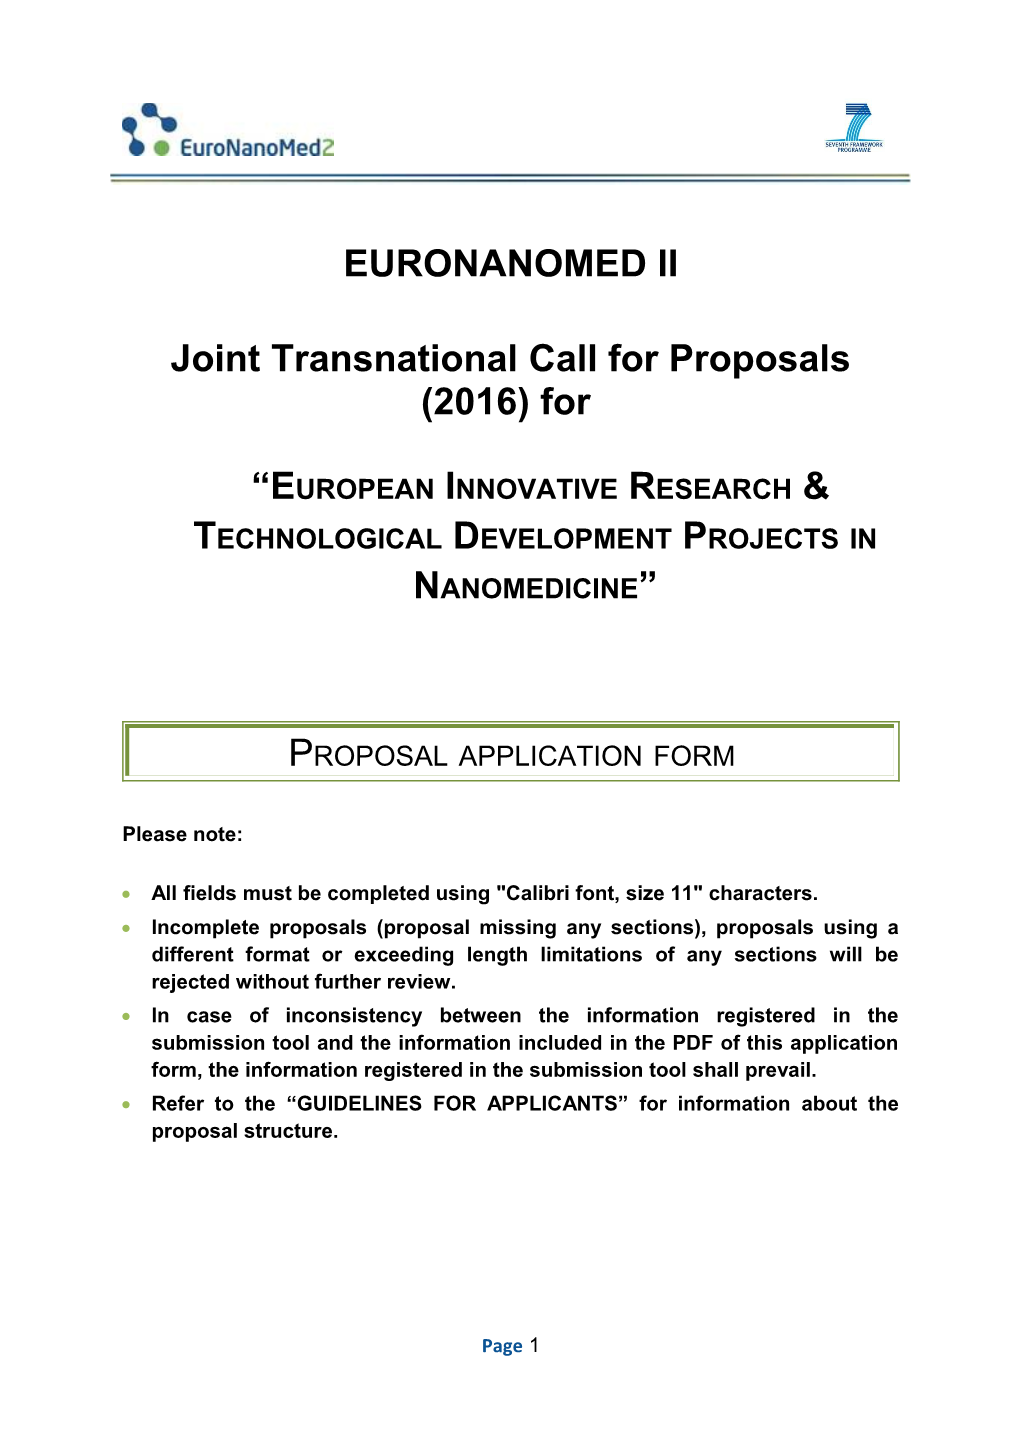 Joint Transnational Call for Proposals (2016) For